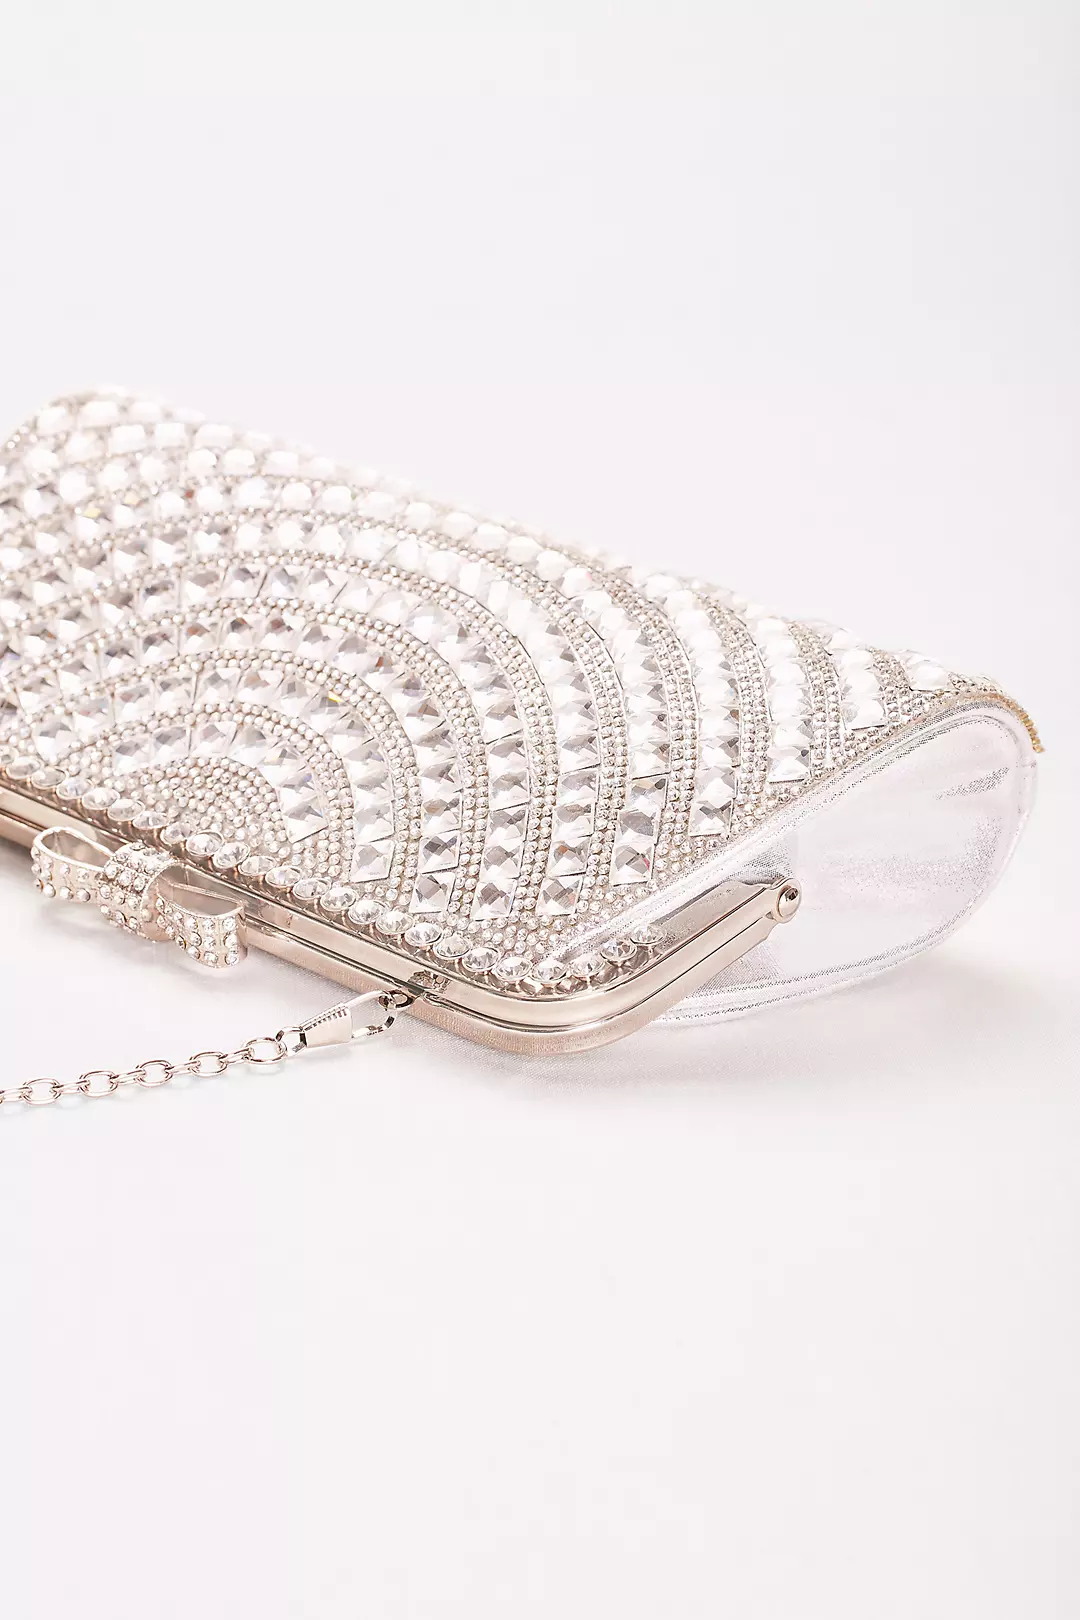 Allover Crystal Bow-Top Clutch Image 2